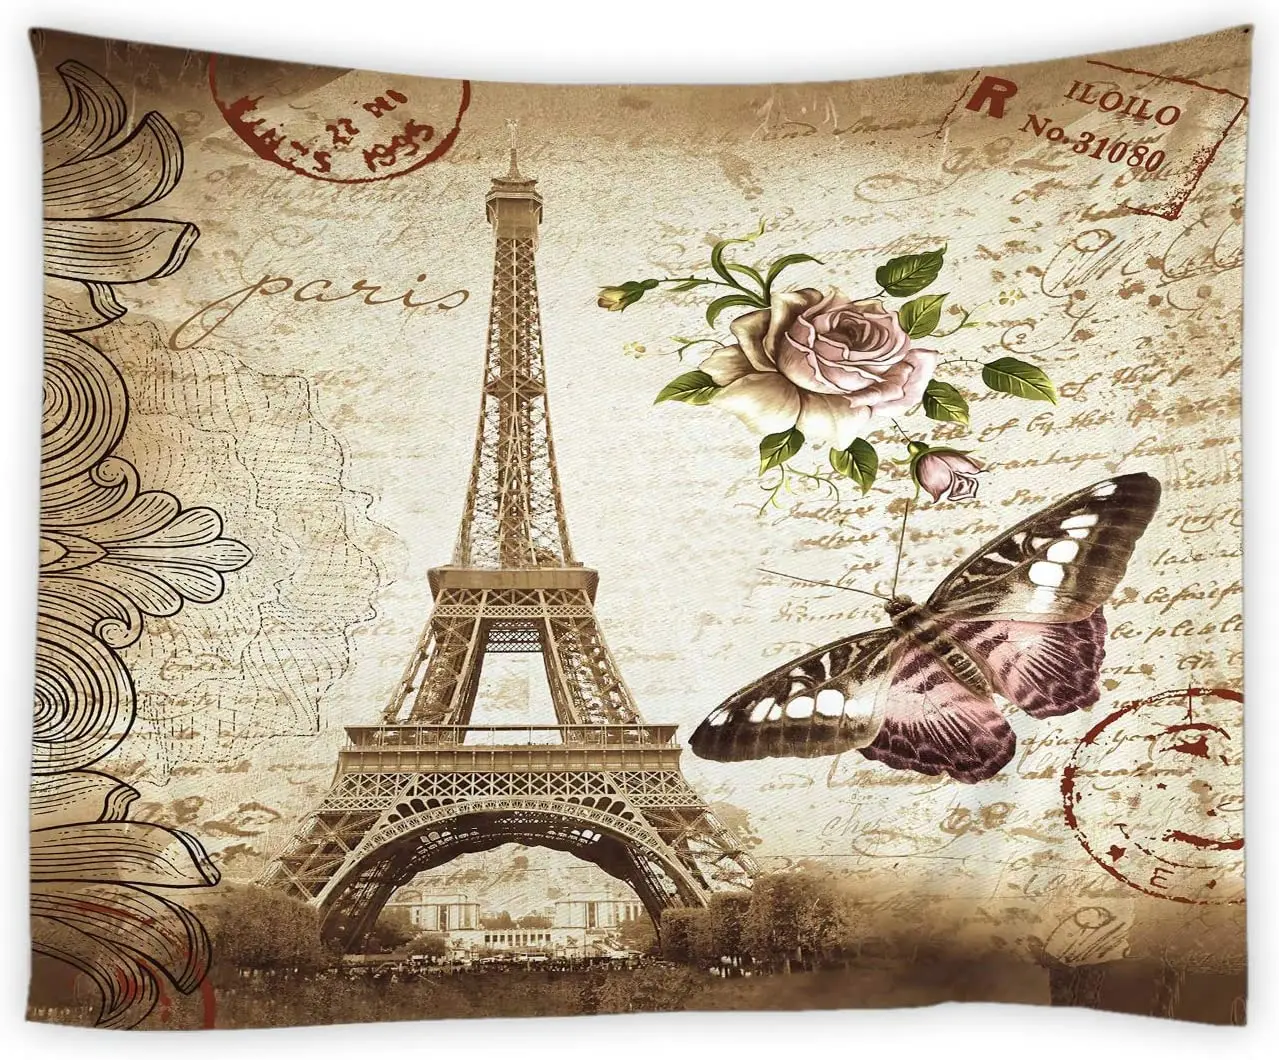 

Vintage Paris Eiffel Tower Tapestry Wall Hanging Retro Floral Rose Flower Stamp Romance City Scenery Décor